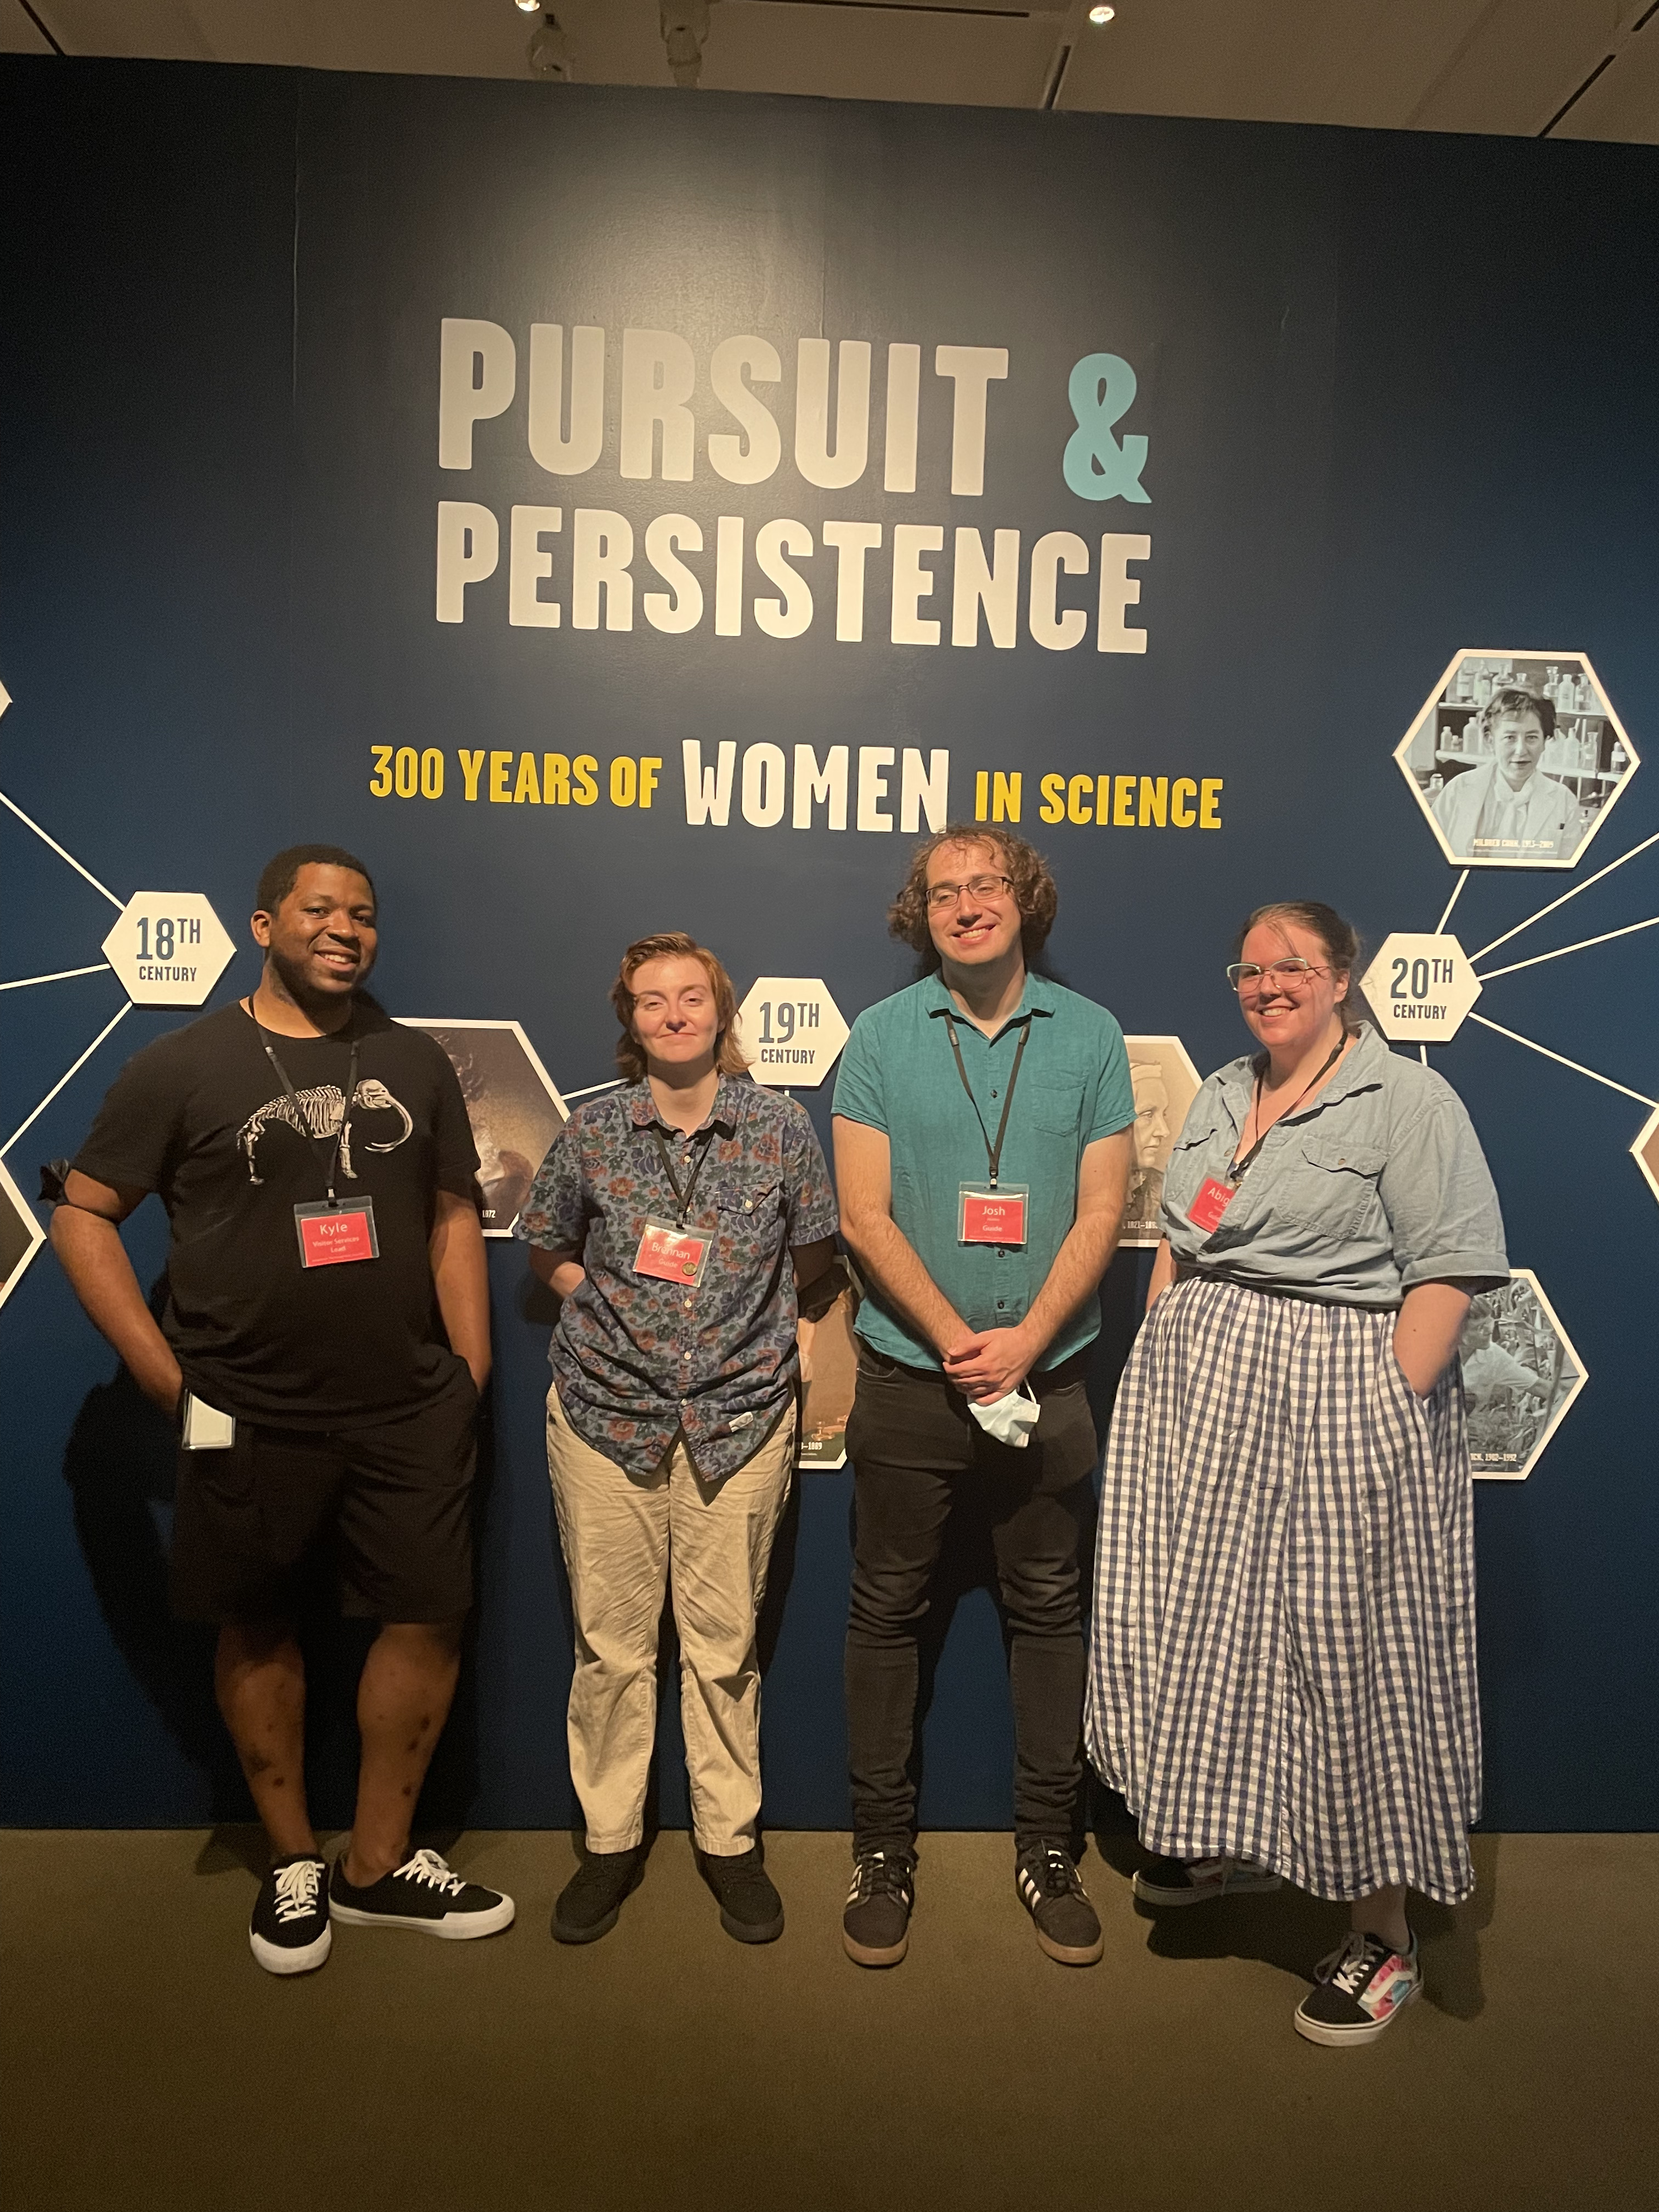 photo of 4 guides standing in museum gallery in front of Pursuit & Persistence title on wall